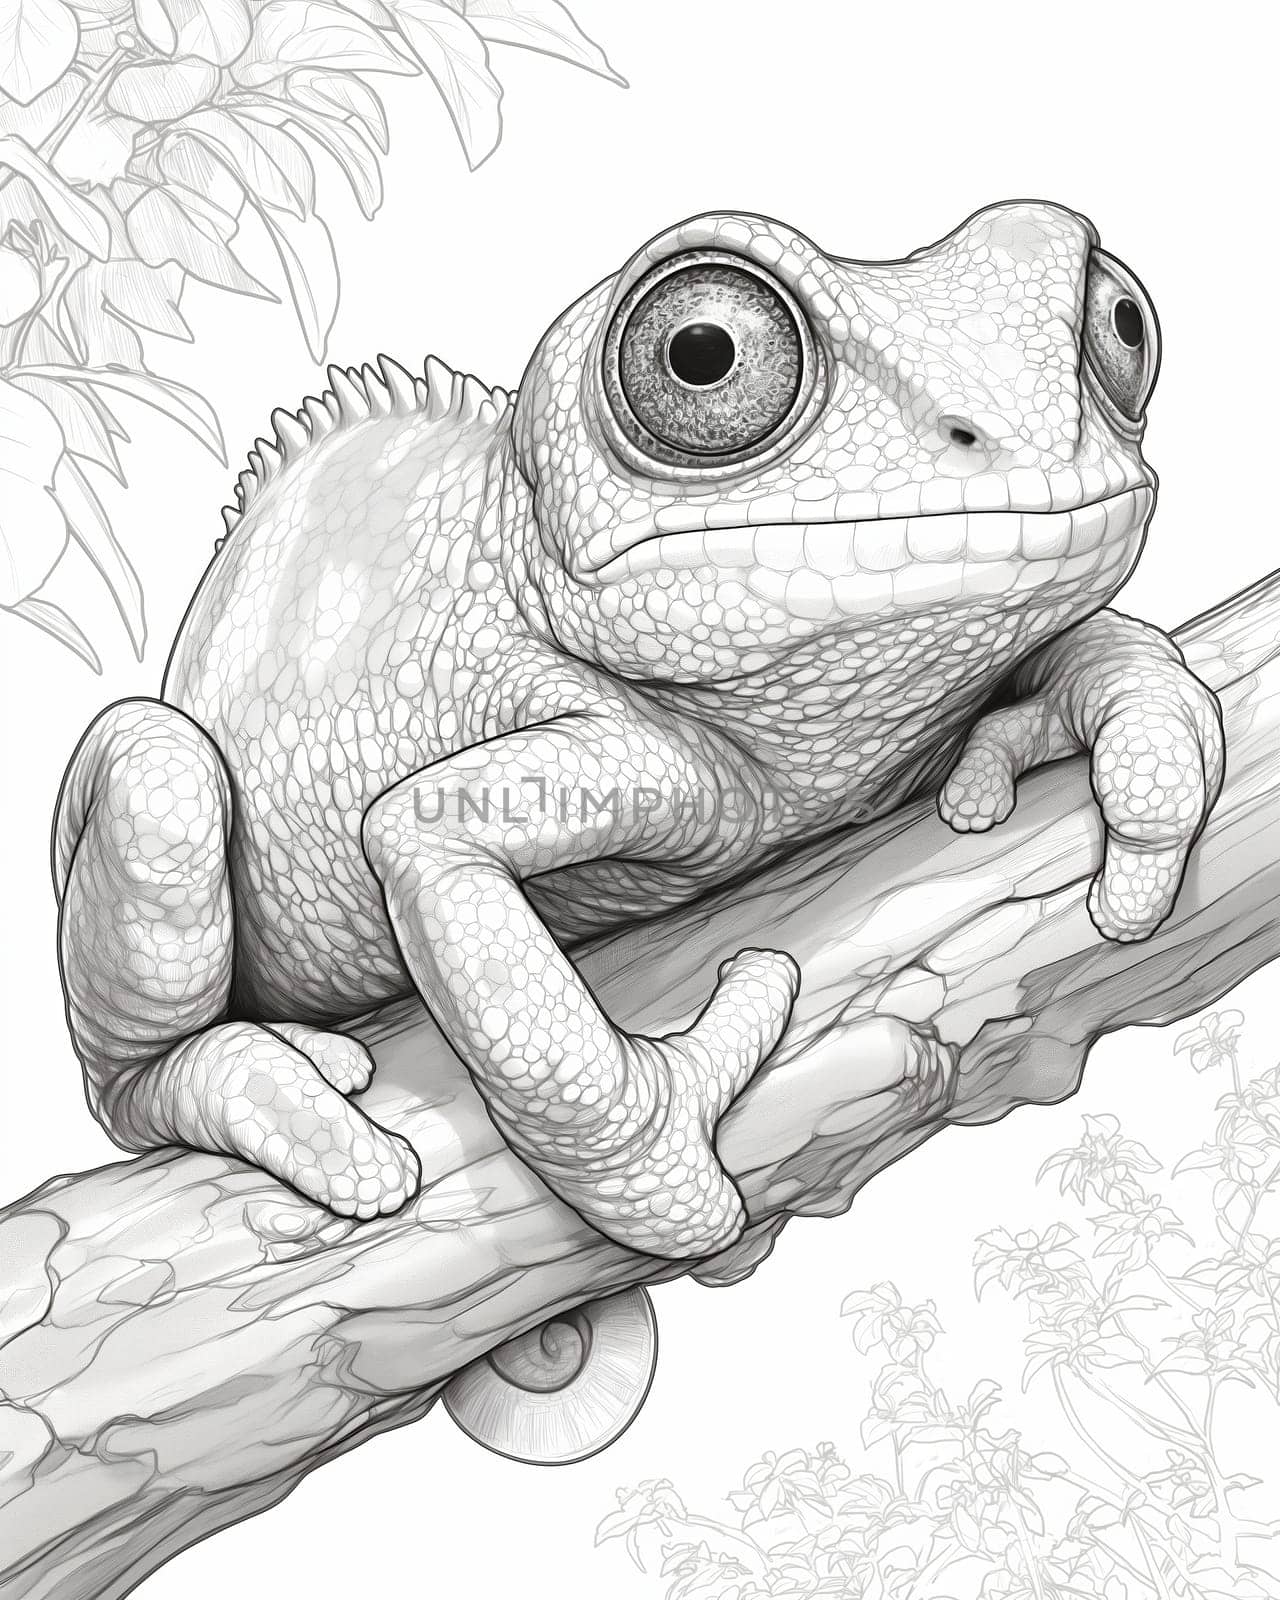 Coloring book for children, coloring animal, chameleon. Selective soft focus.